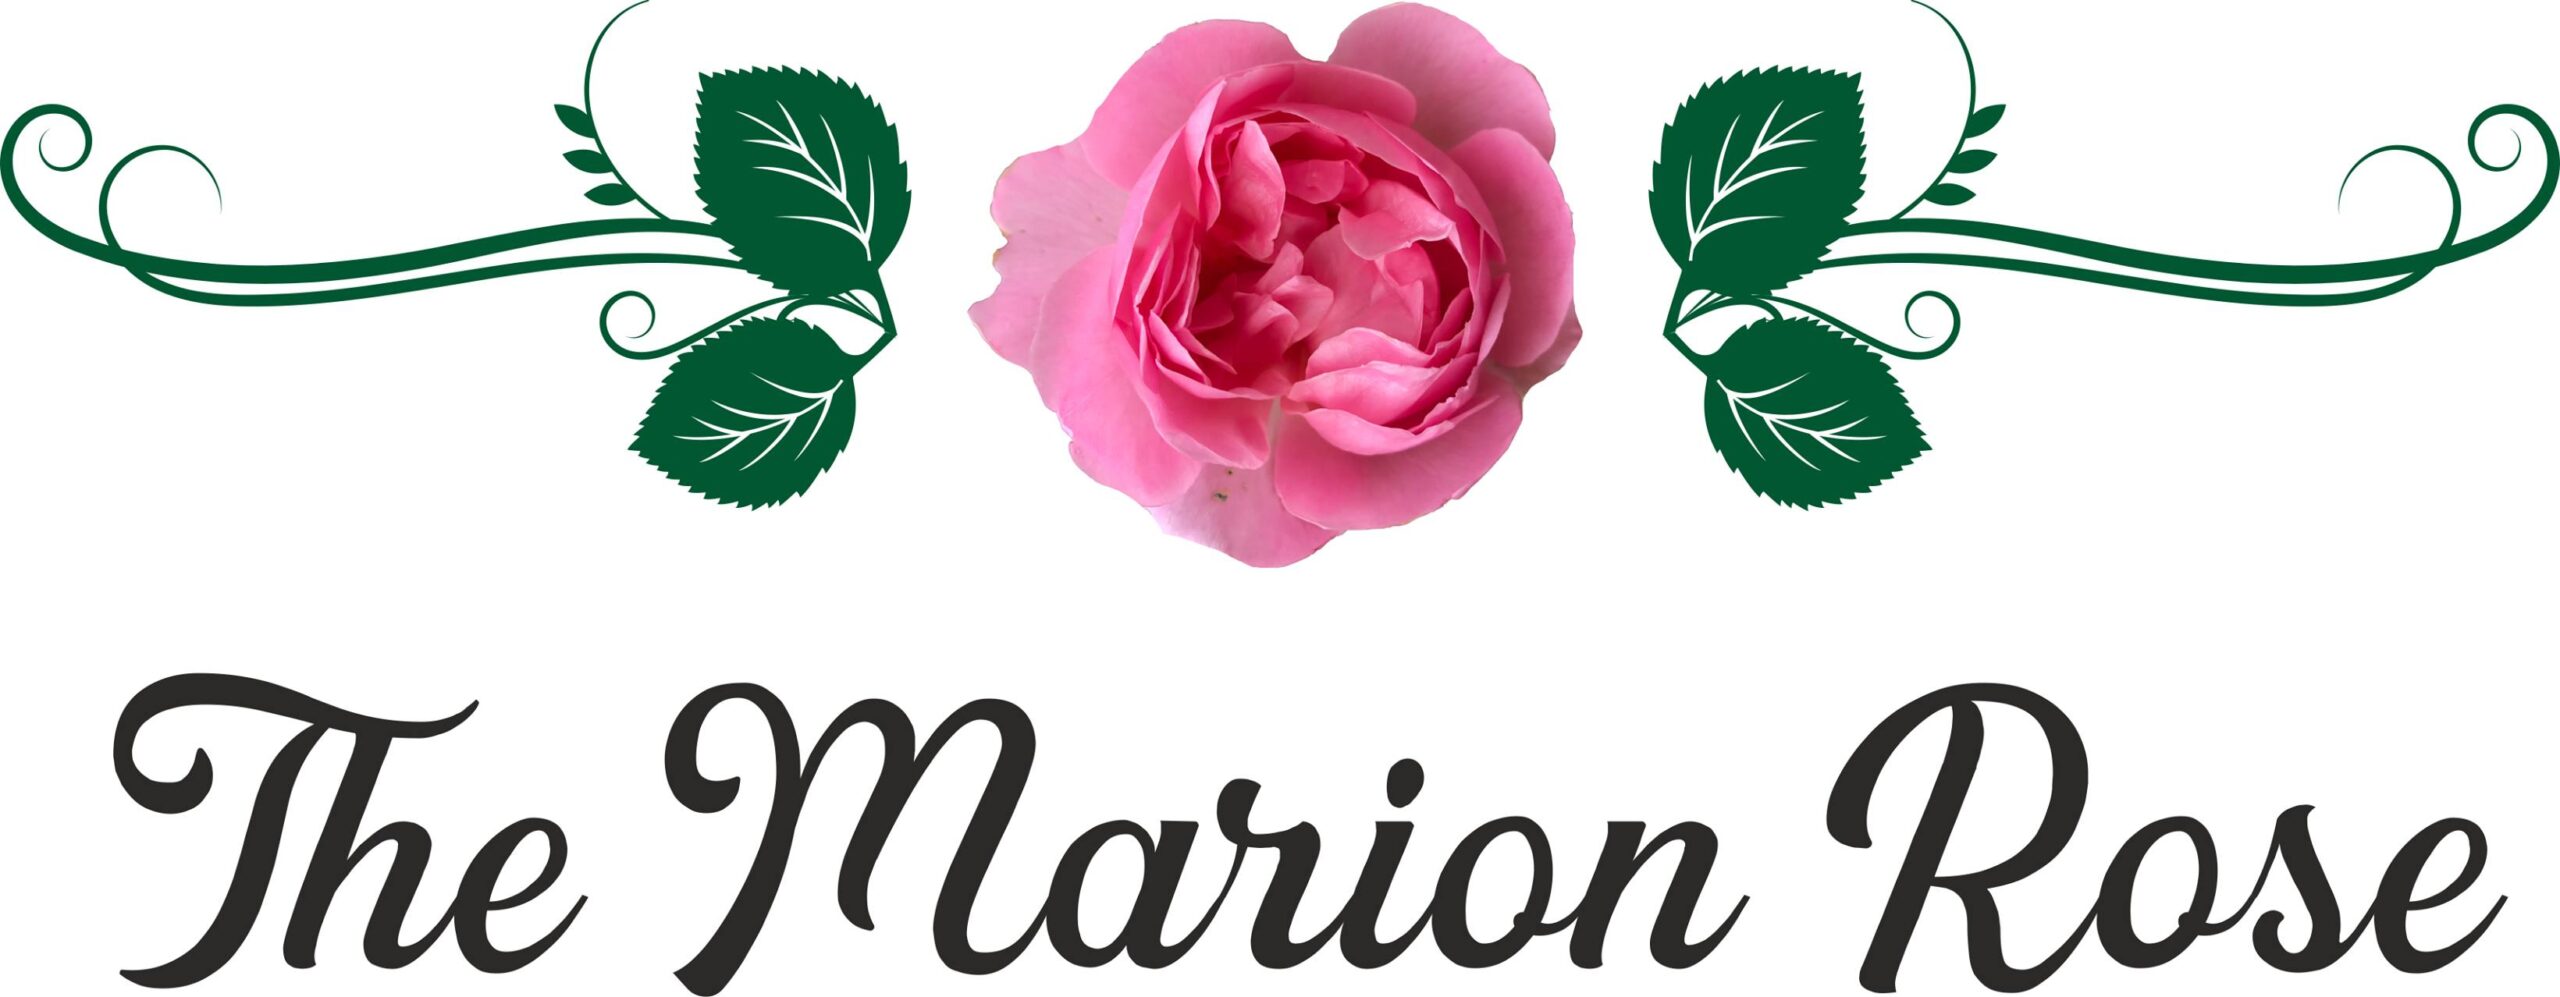 The Marion Rose